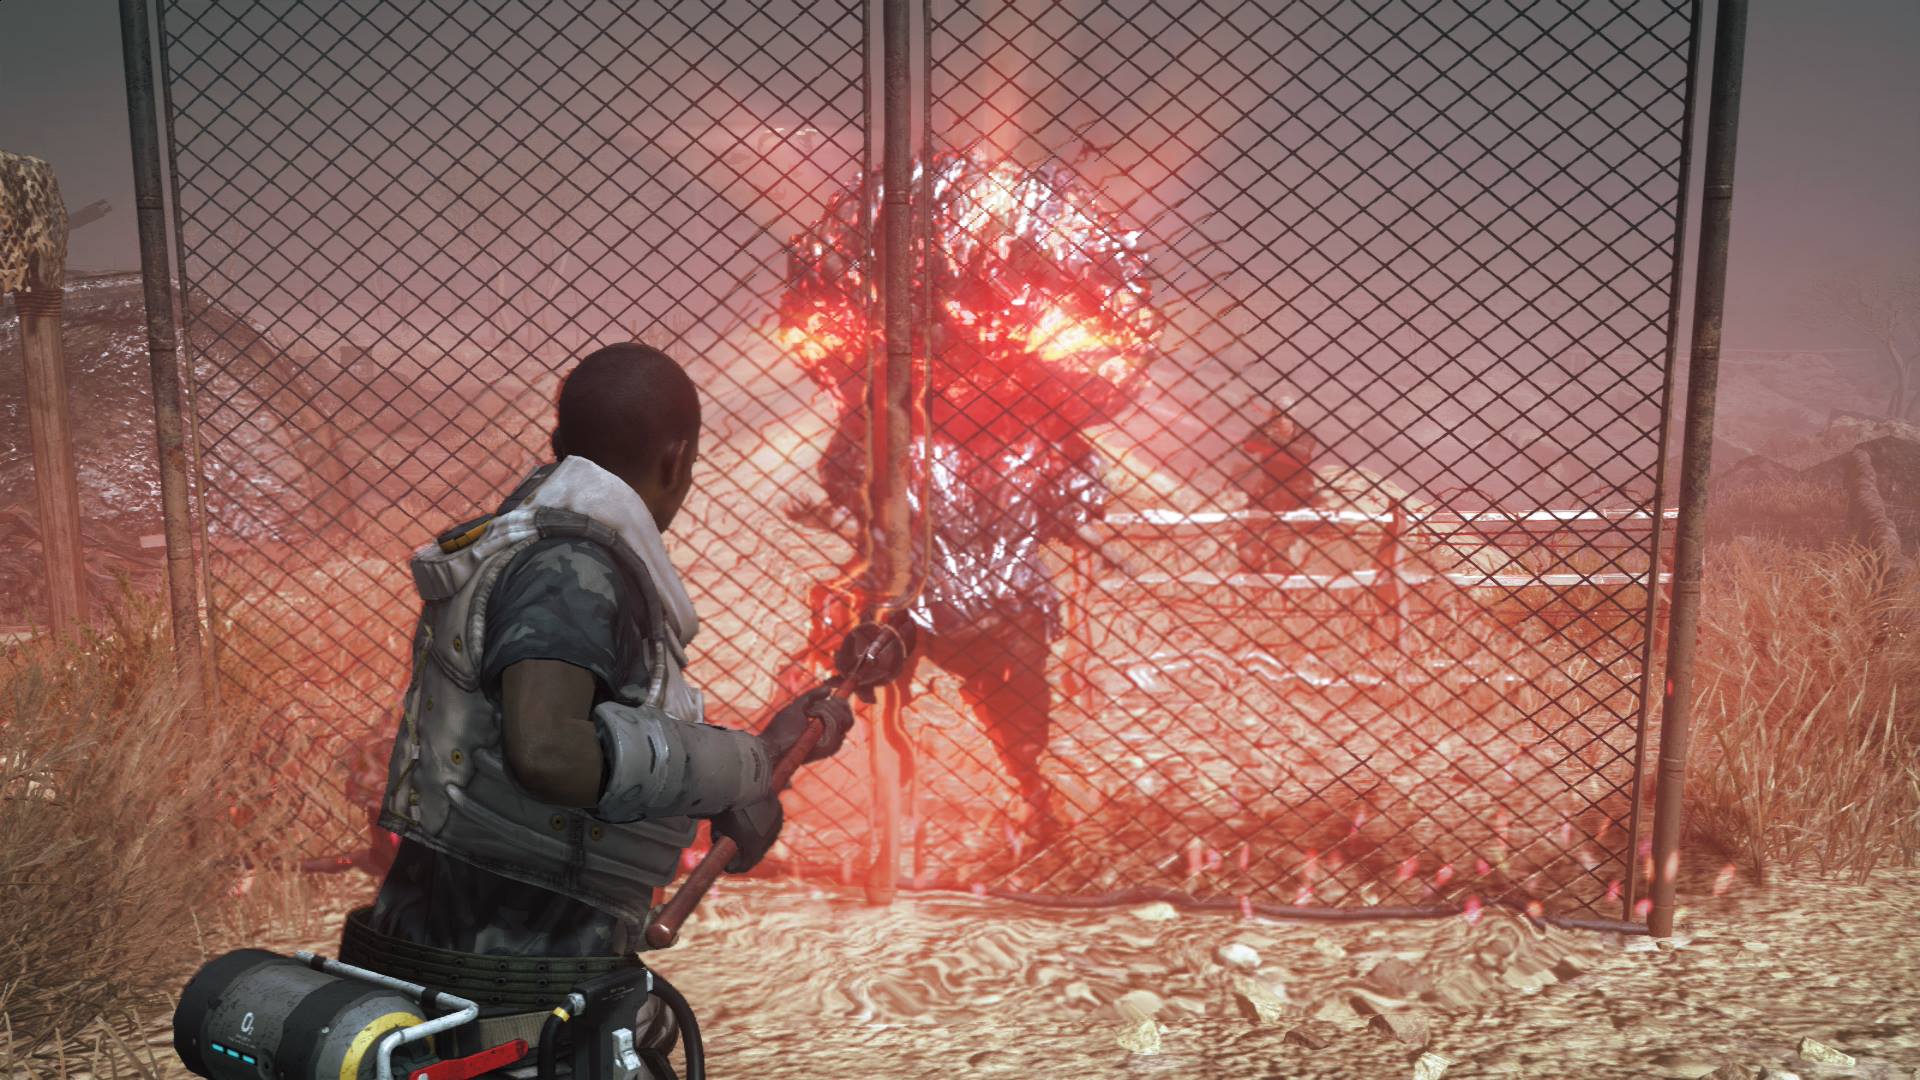 Media asset in full size related to 3dfxzone.it news item entitled as follows: Konami pubblica nuovi screenshots del game Metal Gear Survive | Image Name: news26540_Metal-Gear-Survive-Screenshots_6.jpg